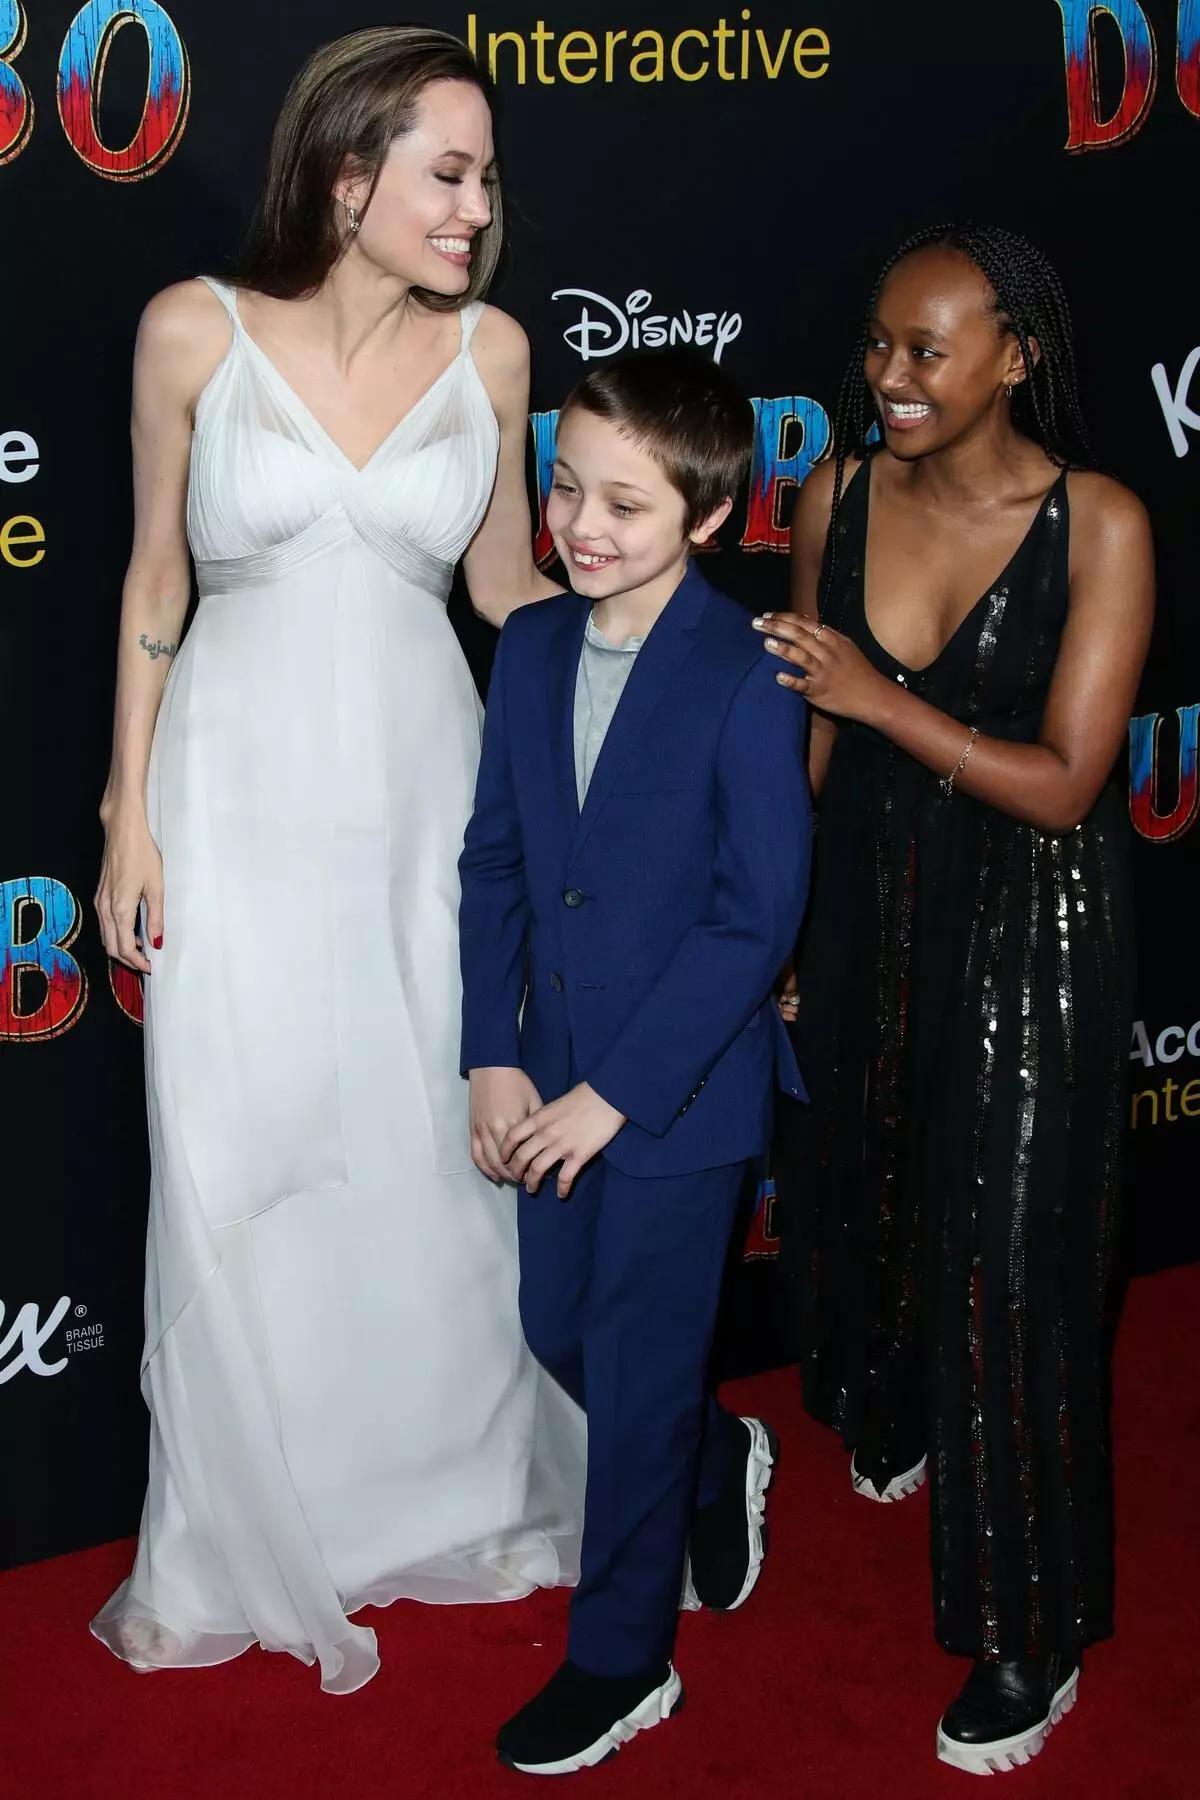 Angelina Jolie with children, Colin Farrell, Eva Green and other stars at the premiere of 